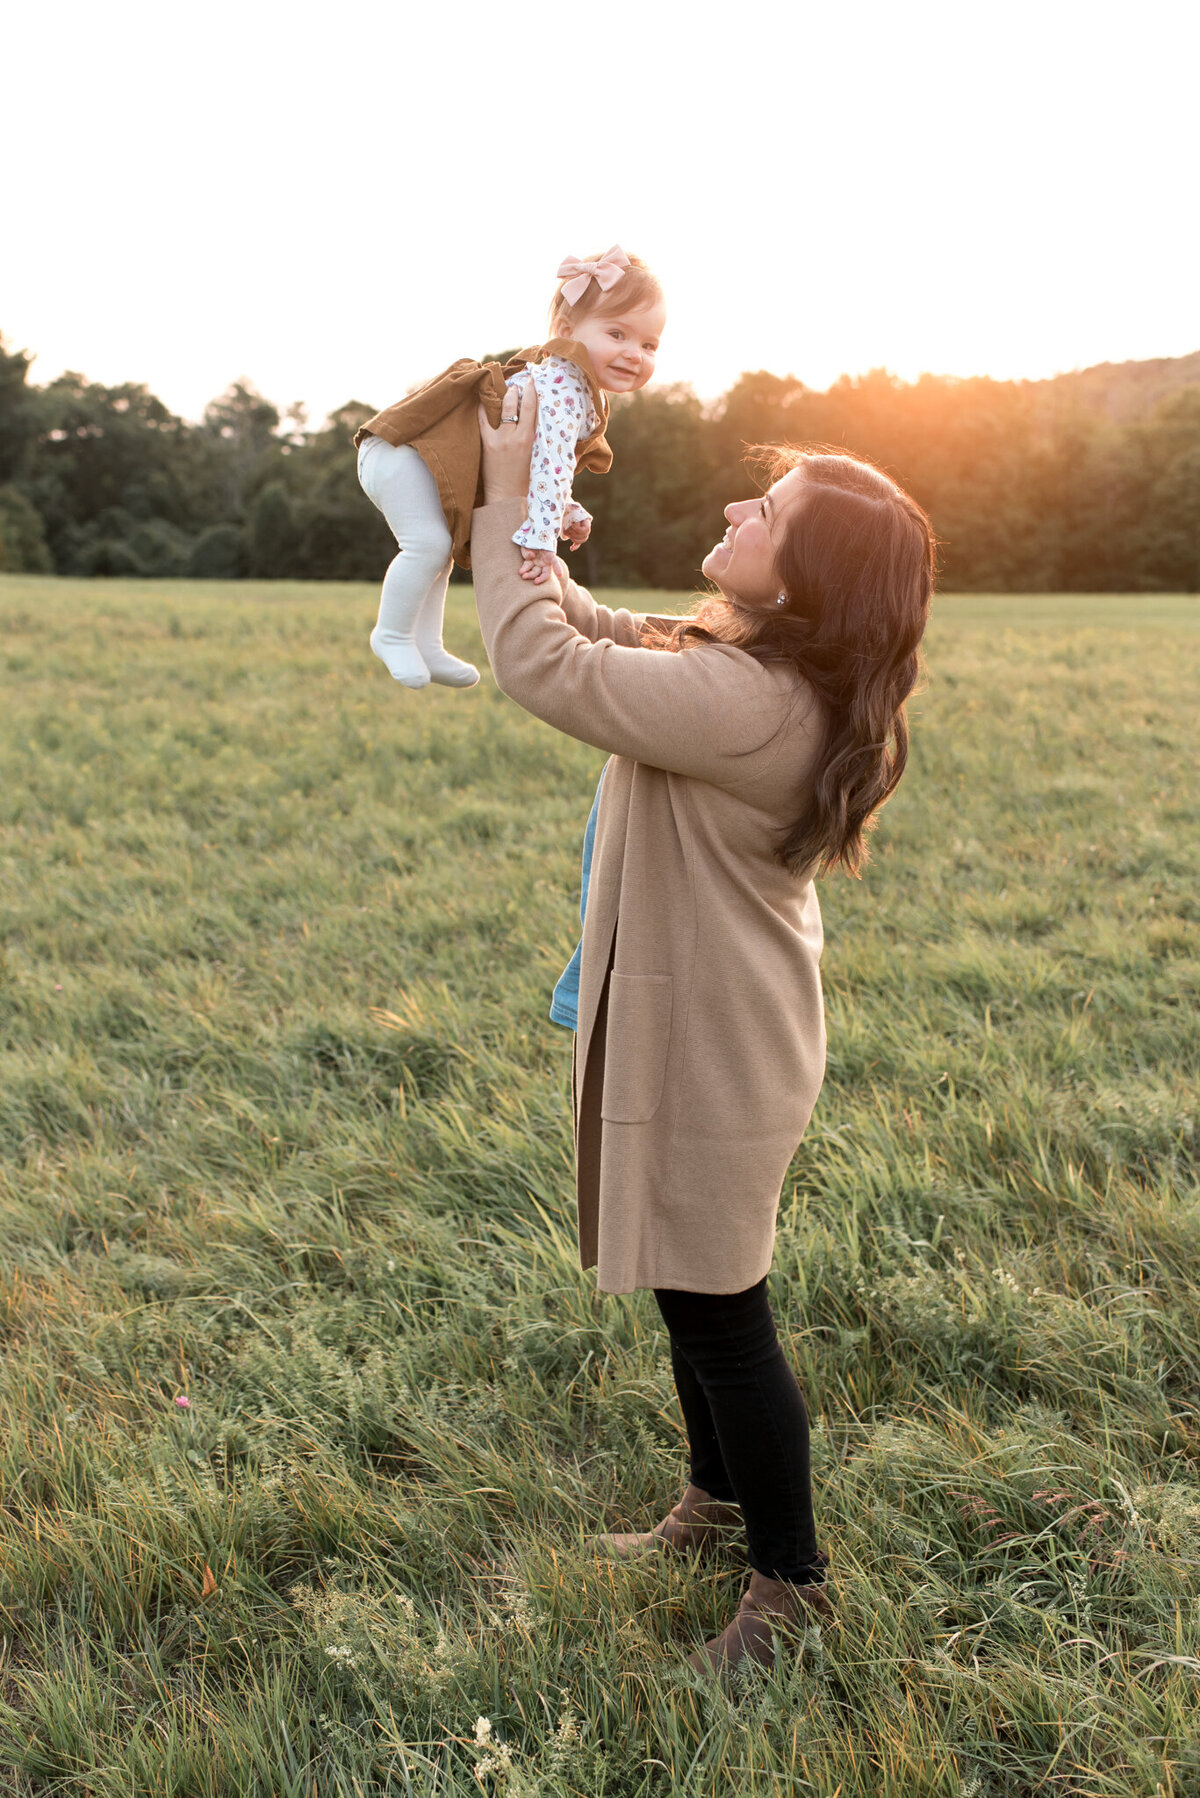 Mother is holding one year old daughter in the air in the middle of a field with sunset